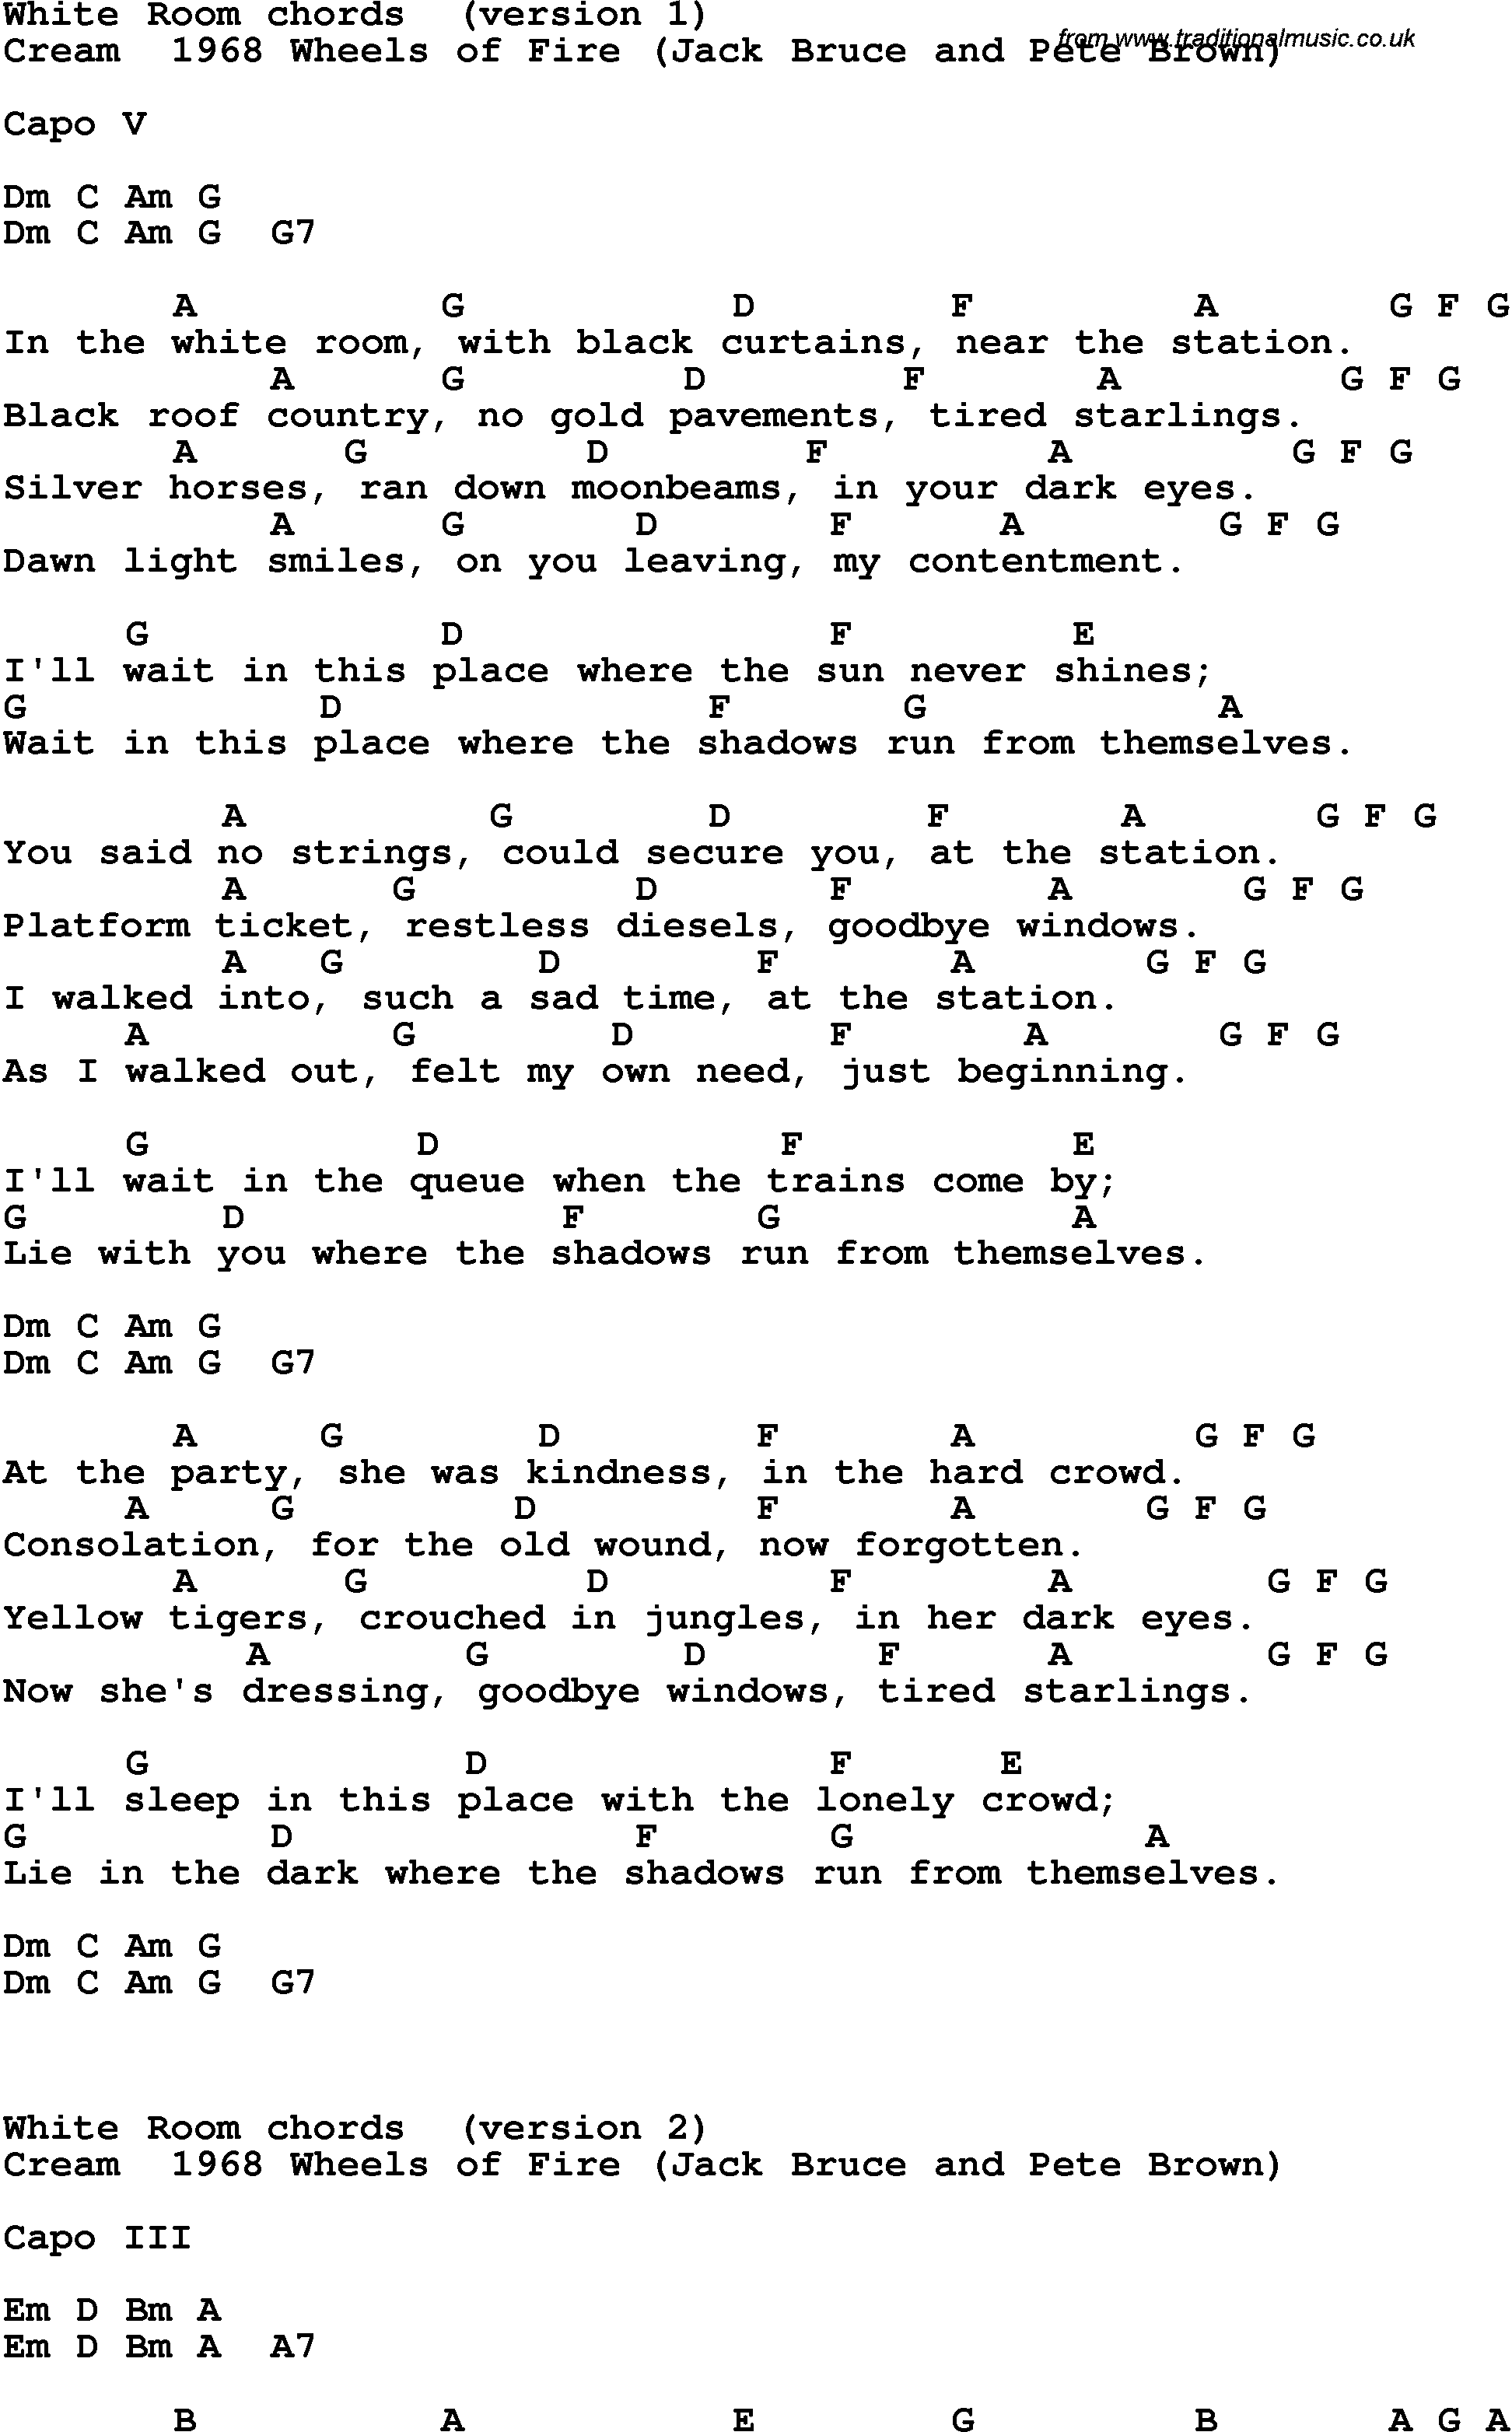 Song Lyrics With Guitar Chords For White Room